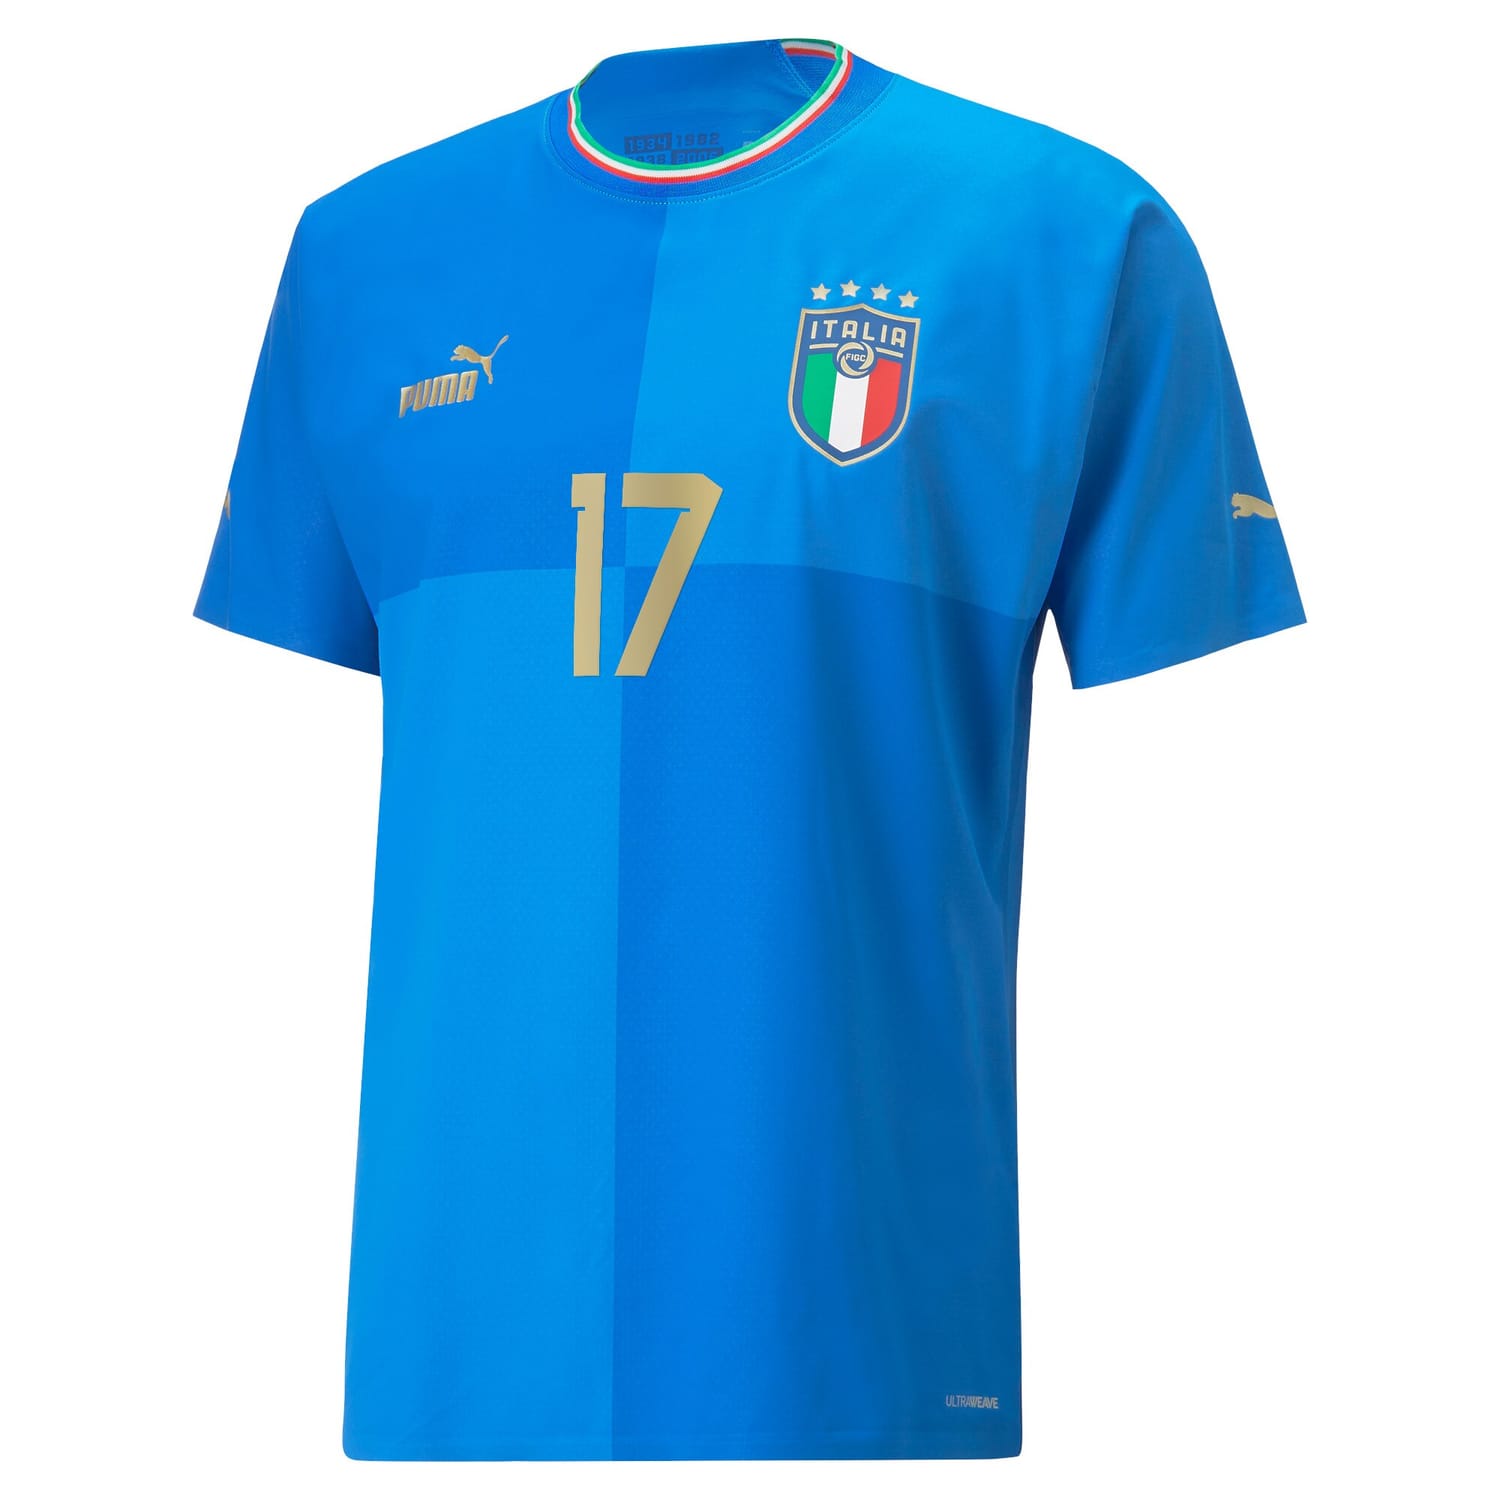 Italy National Team Home Authentic Jersey Shirt player Ciro Immobile 17 printing for Men